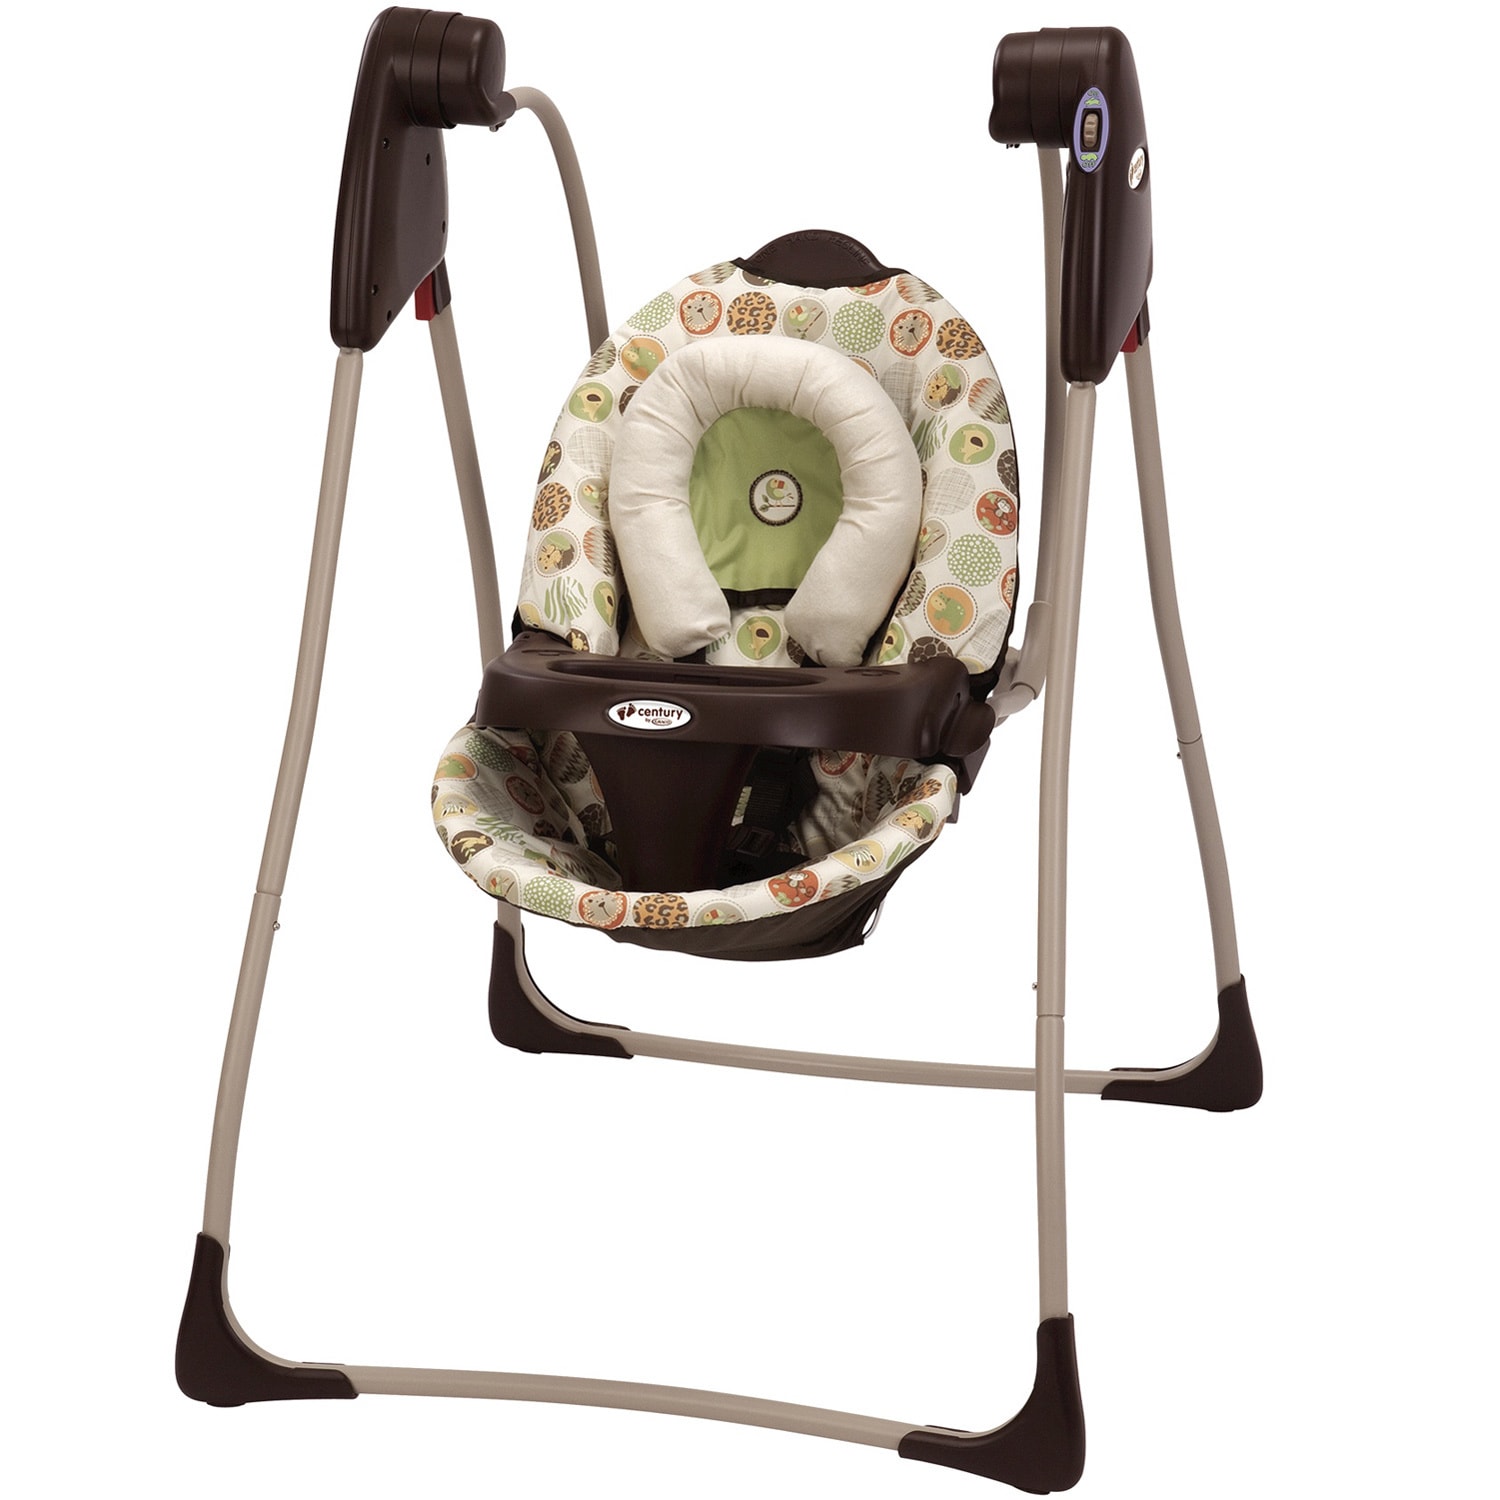 Shop Graco Century Compact Swing in 